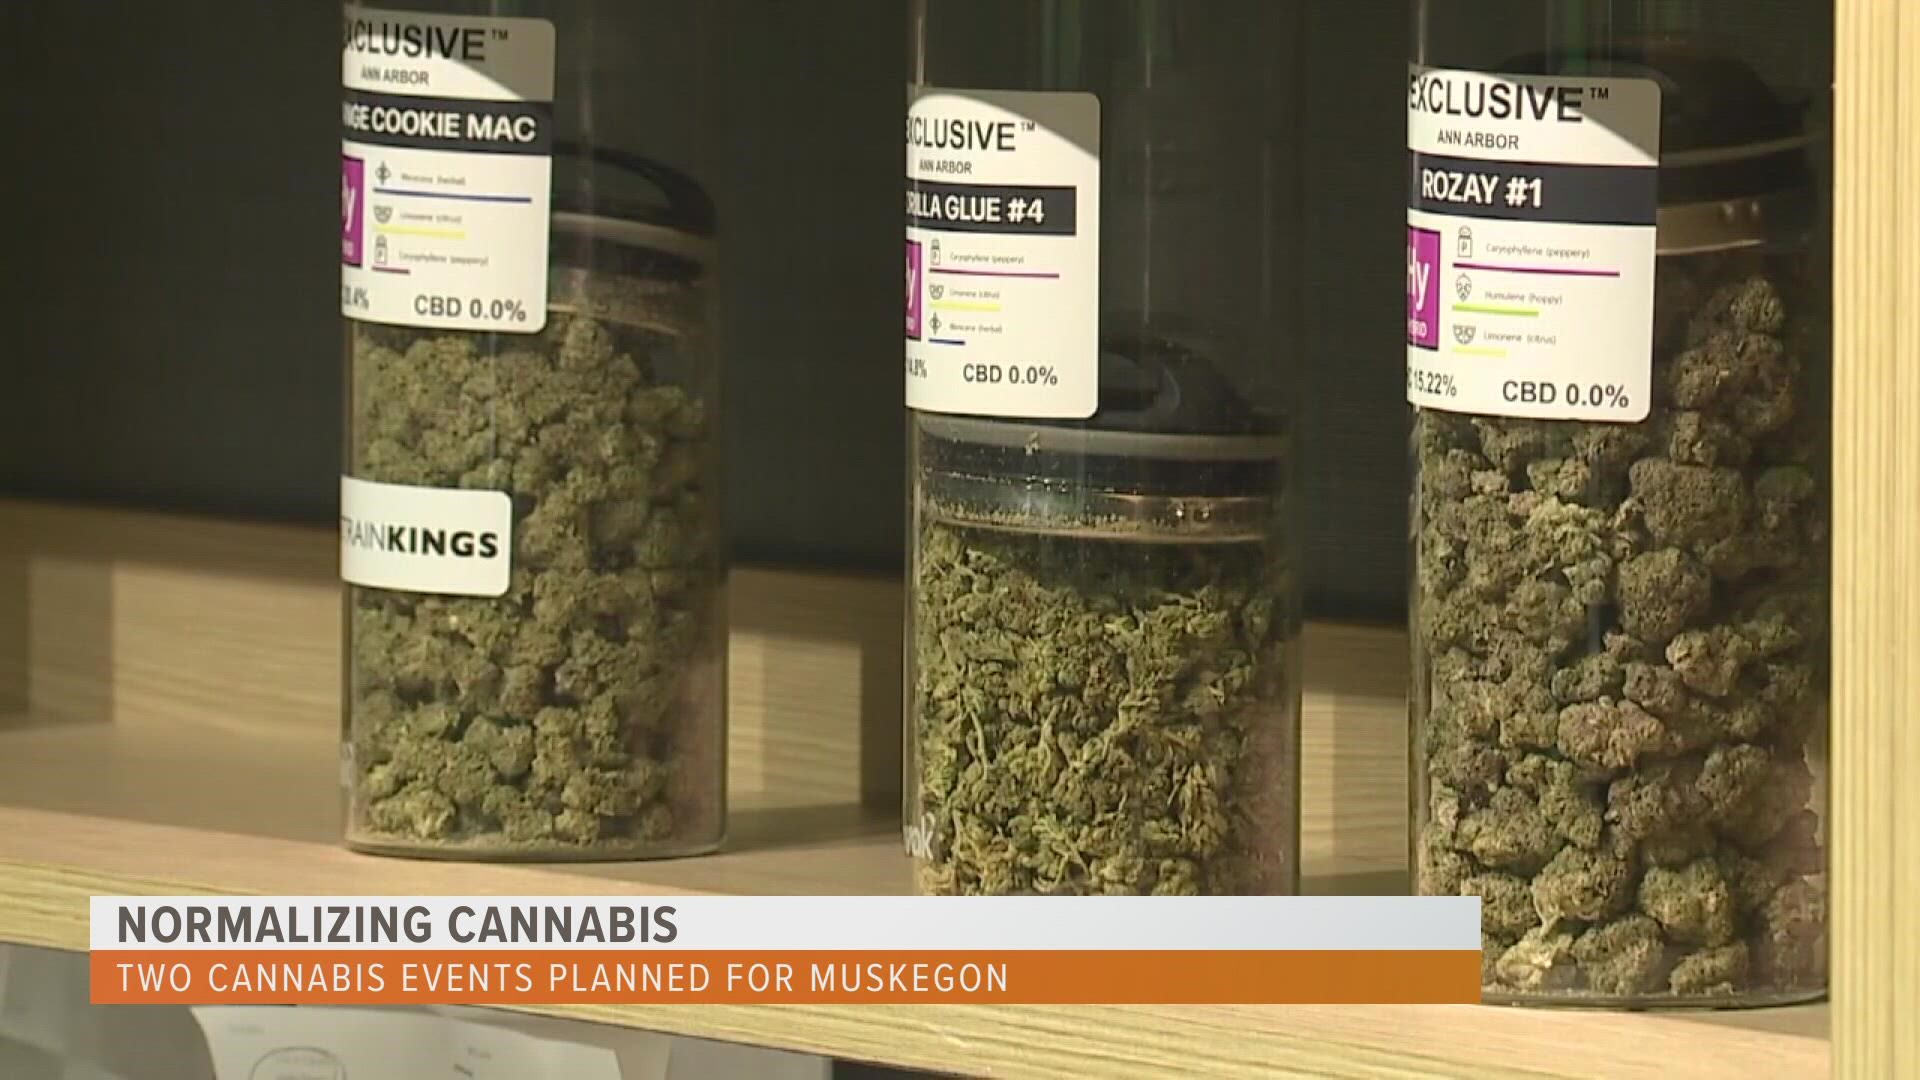 This summer, Michael Webster, founder of Exspiravit, a company licensed to host cannabis events, is bringing two events to Muskegon.